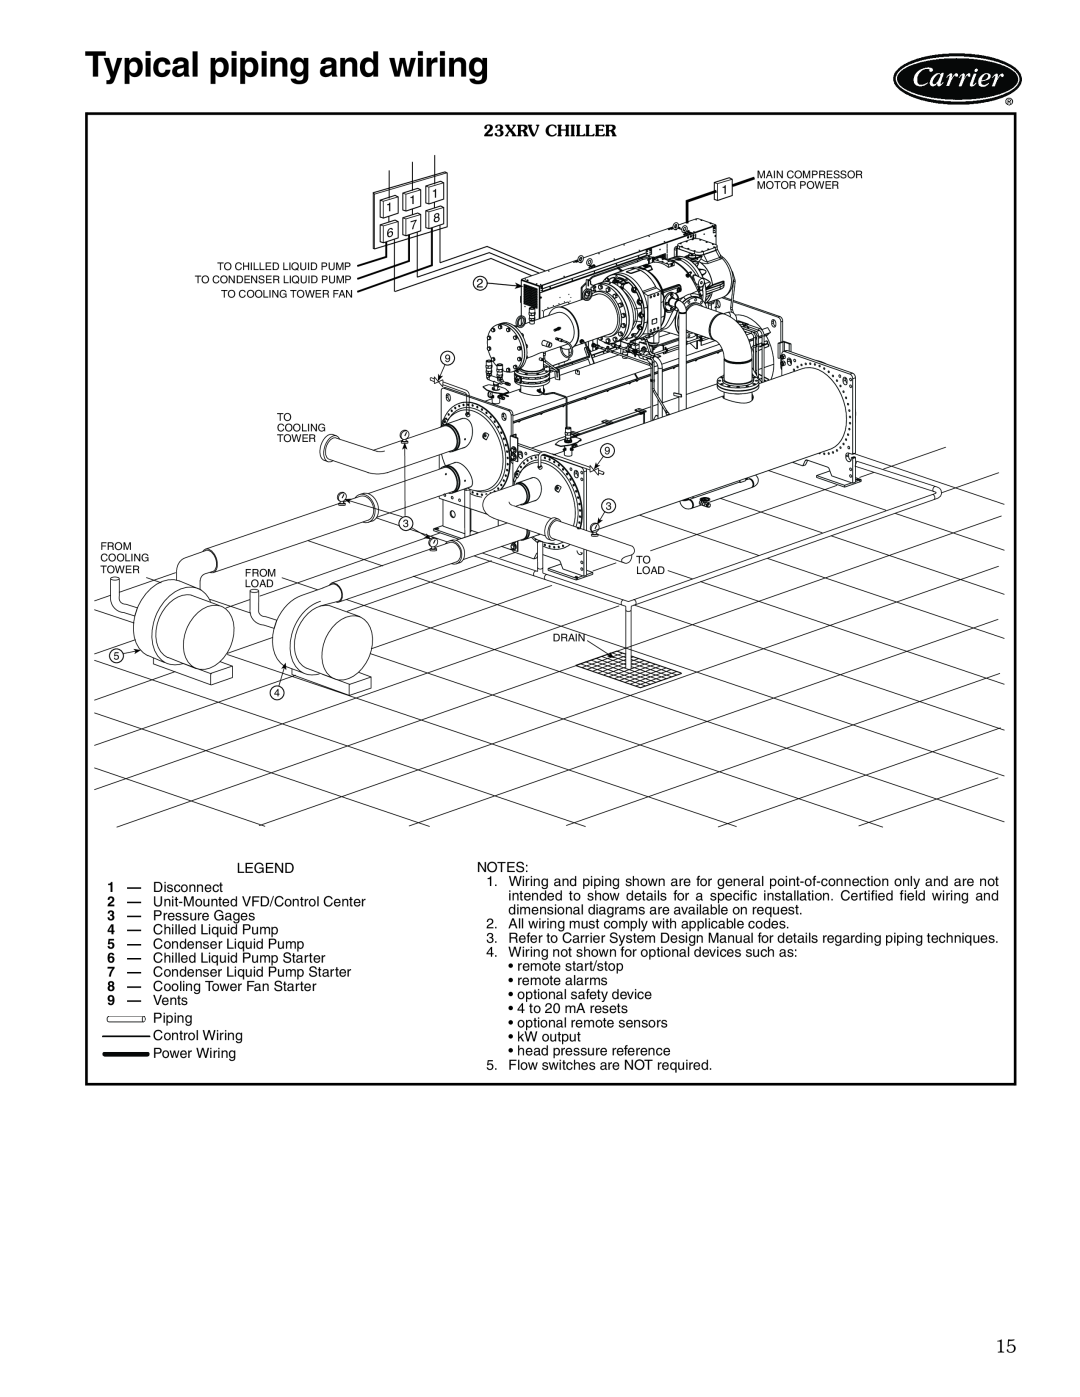 Carrier manual Typical piping and wiring, 23XRV CHILLER 